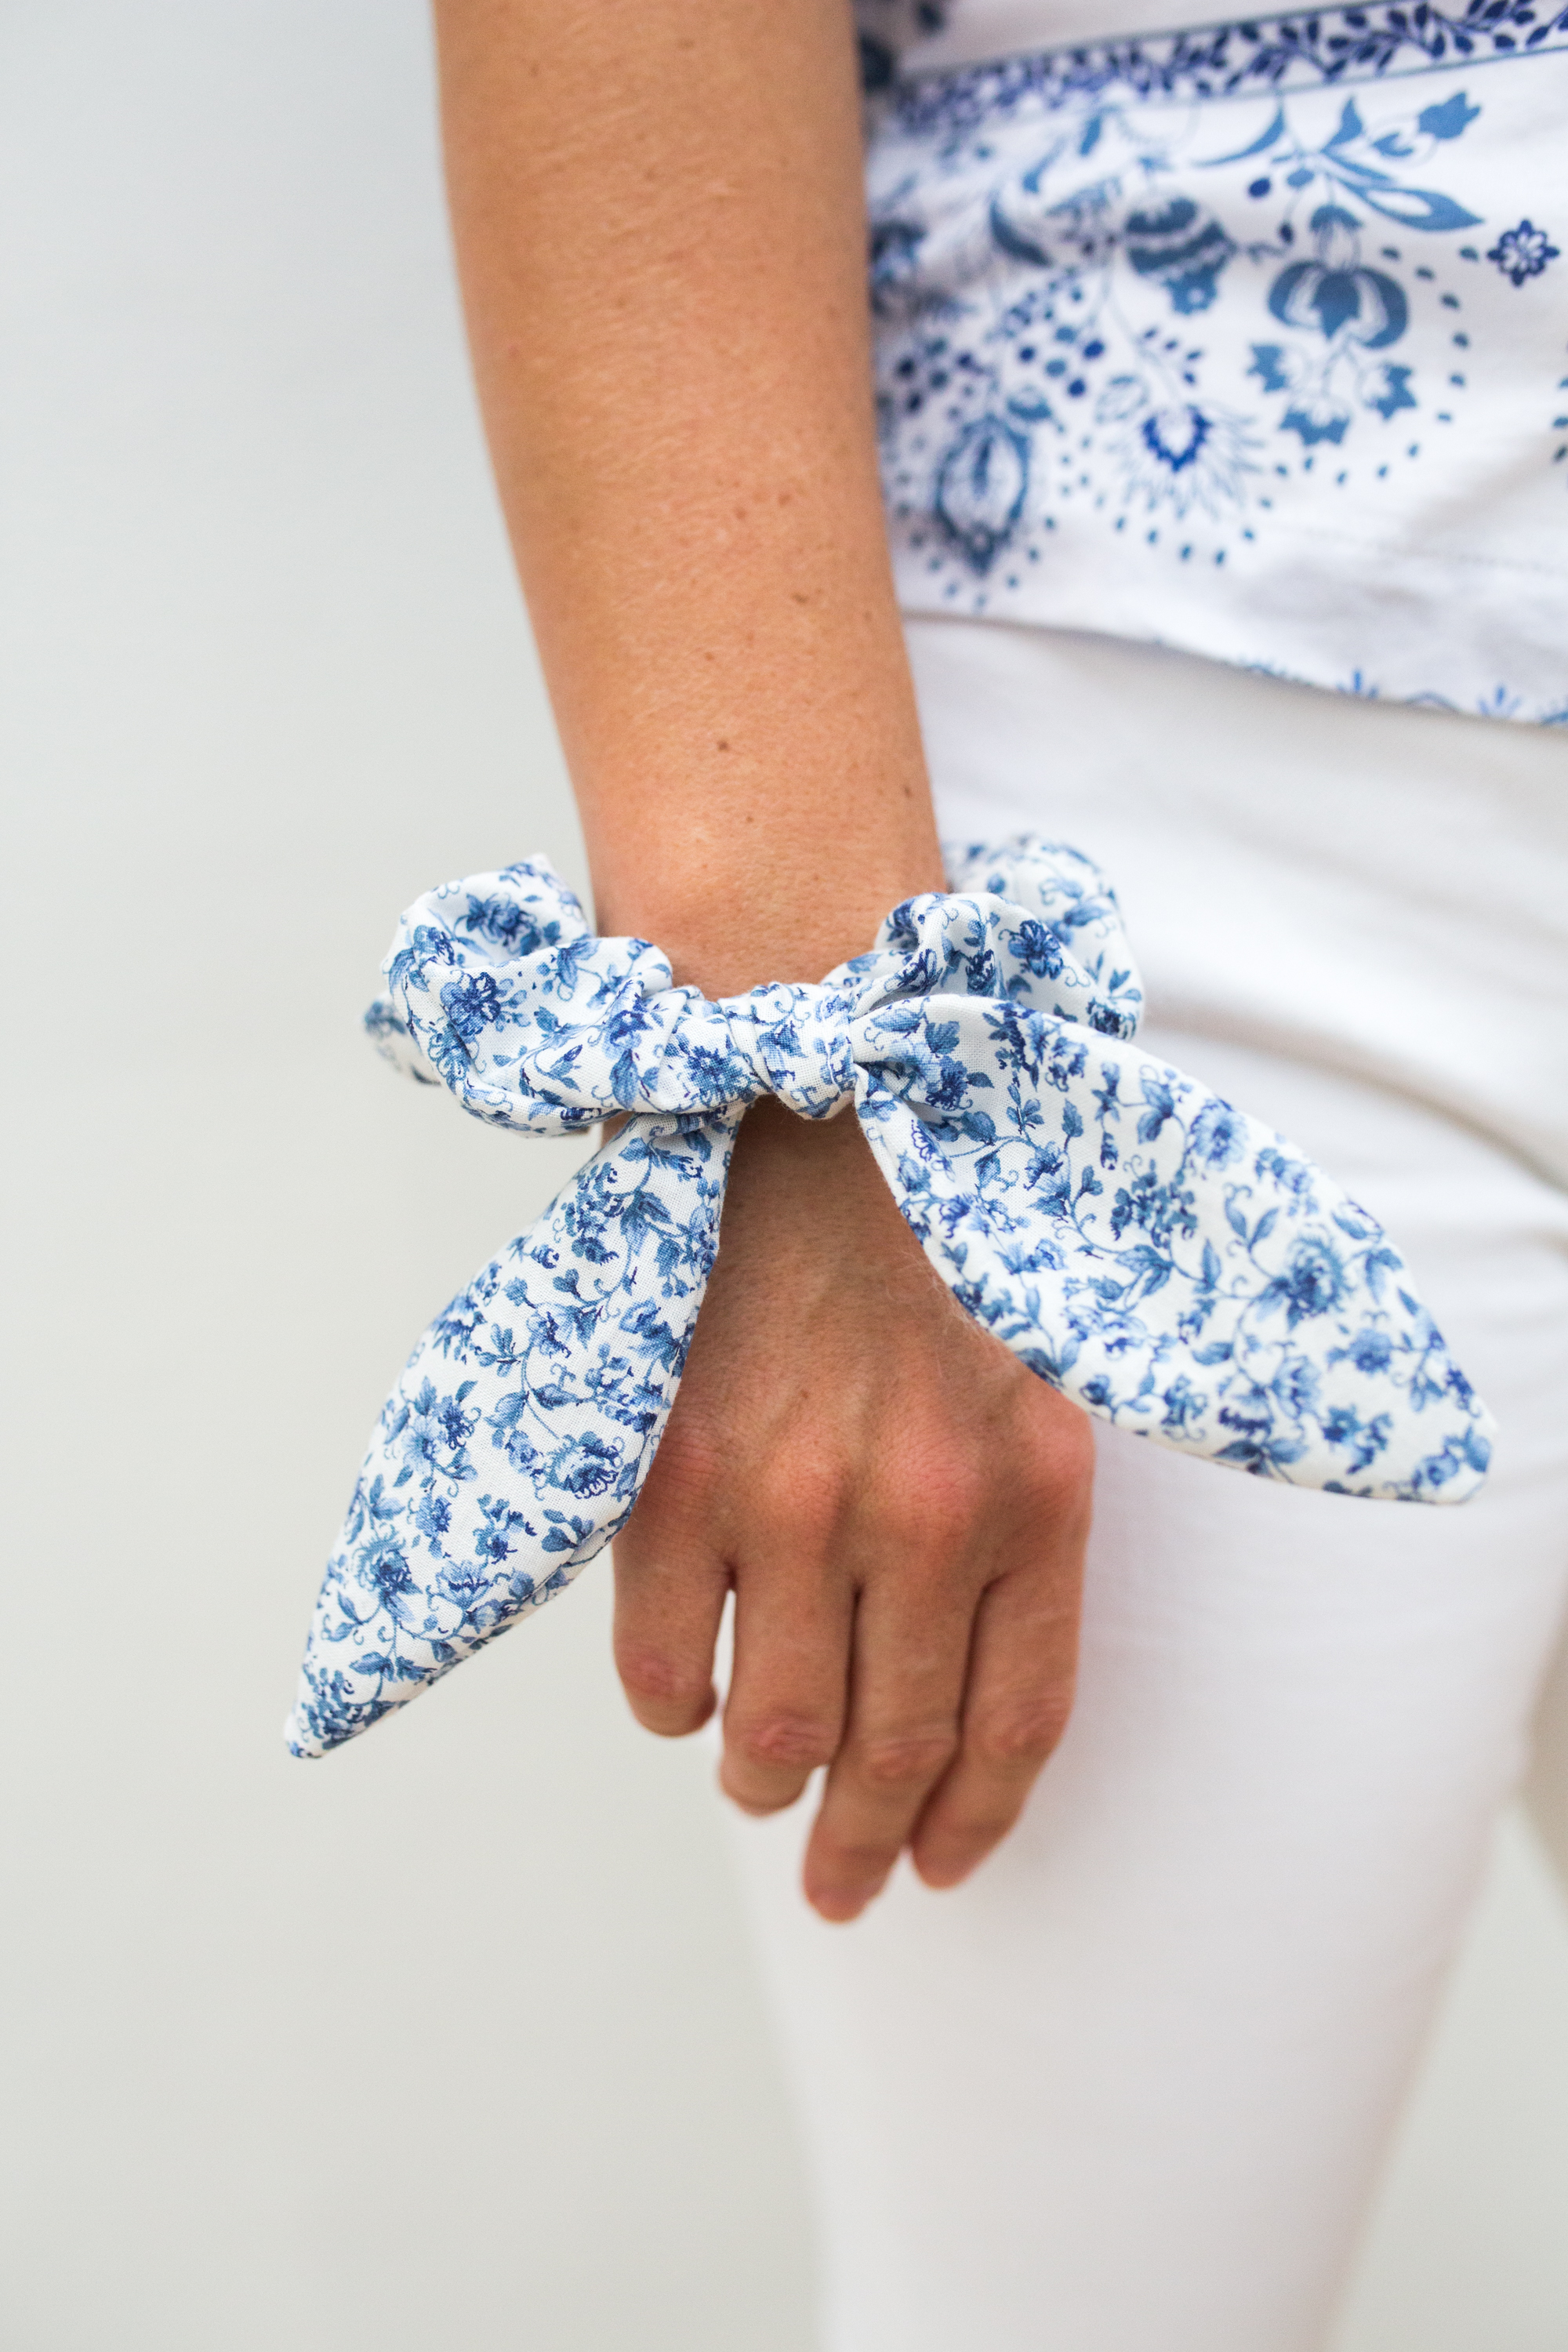 Blue and White Floral Scrunchie / White Eyele Hair Tie / Bow Hair Scrunchie / Hair Accessory / Straw Bag / White Jeans / Preppy Style - Sunshine Style 